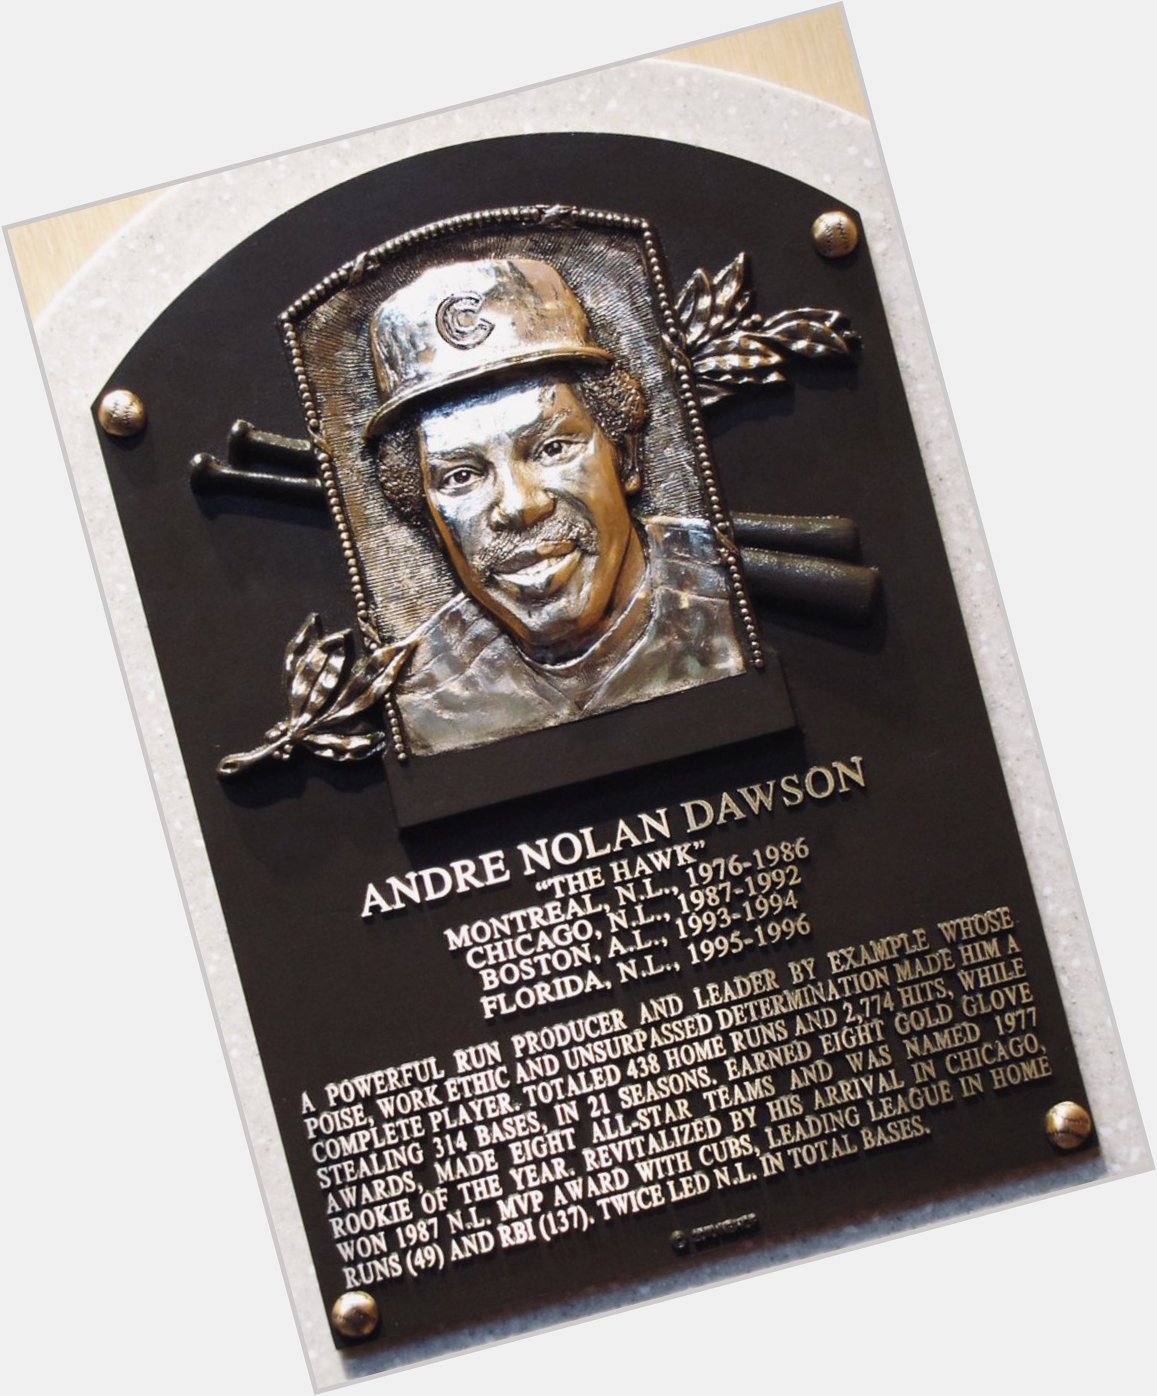 Happy birthday to legend Andre Dawson!

I corrected your plaque for you. 